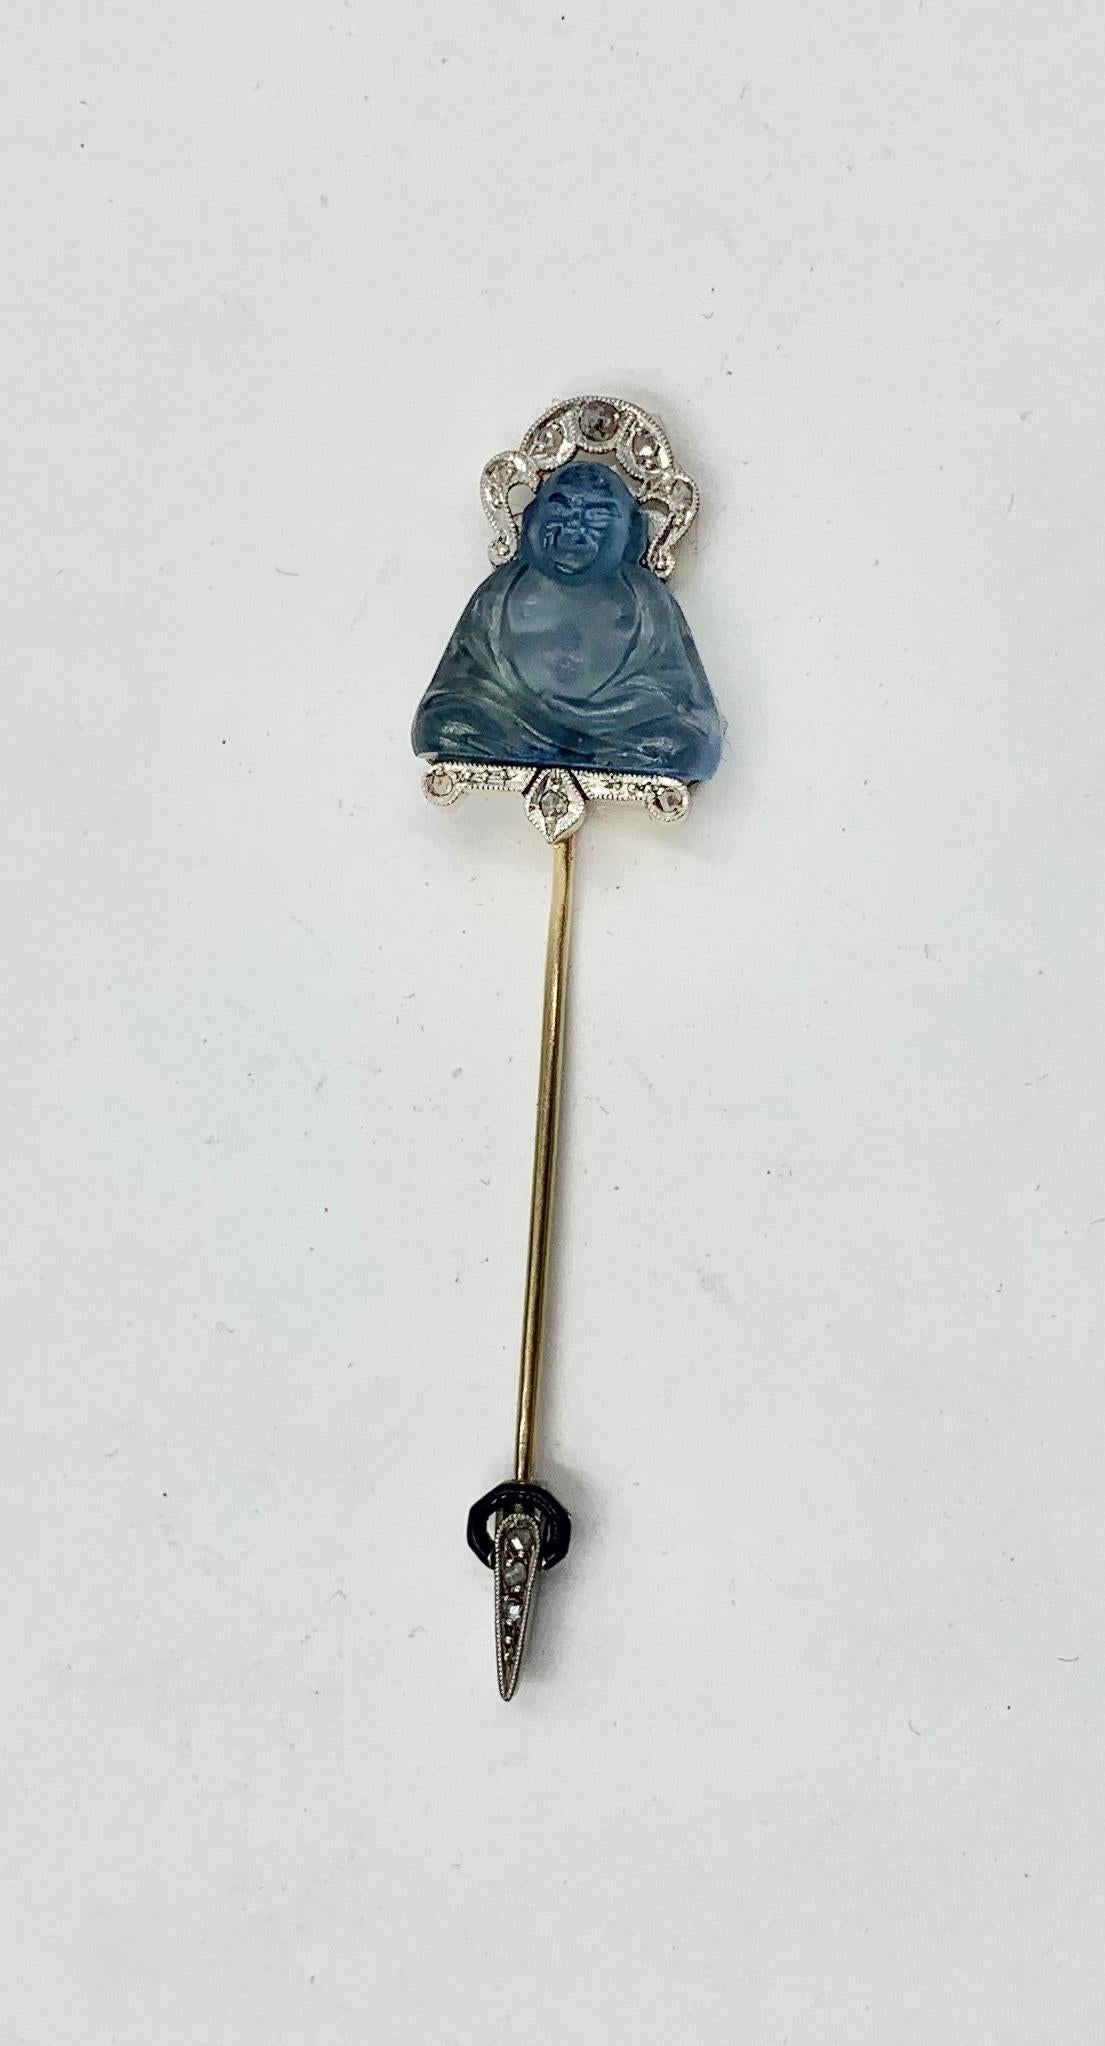 The Rose Diamond Platinum Enamel Buddha Jabot Pin Brooch is an Art Deco Masterpiece.  The seated Buddha is blue art glass and is absolutely exquisite.  Buddha wears a Rose Cut Diamond and Platinum Headdress.  Below the seated Buddha is a further